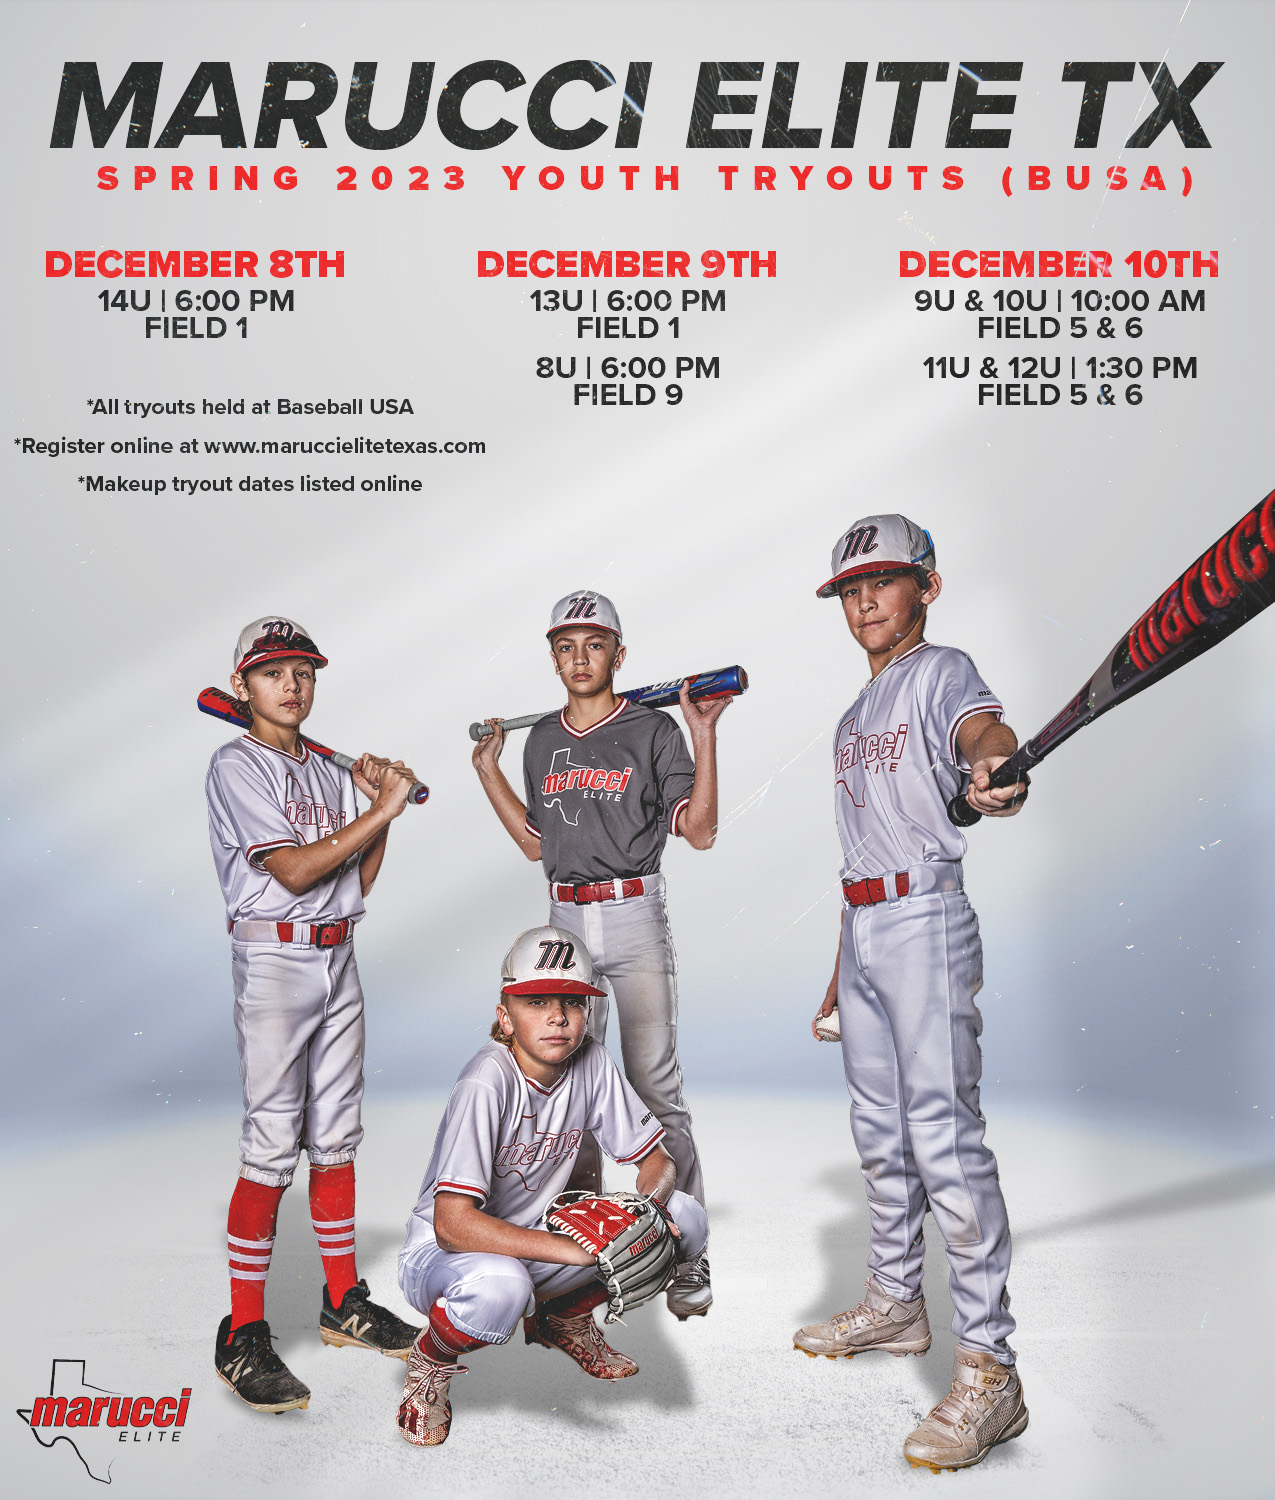 Spring 2023 Tryout Dates for Baseball USA!! Marucci Elite Texas